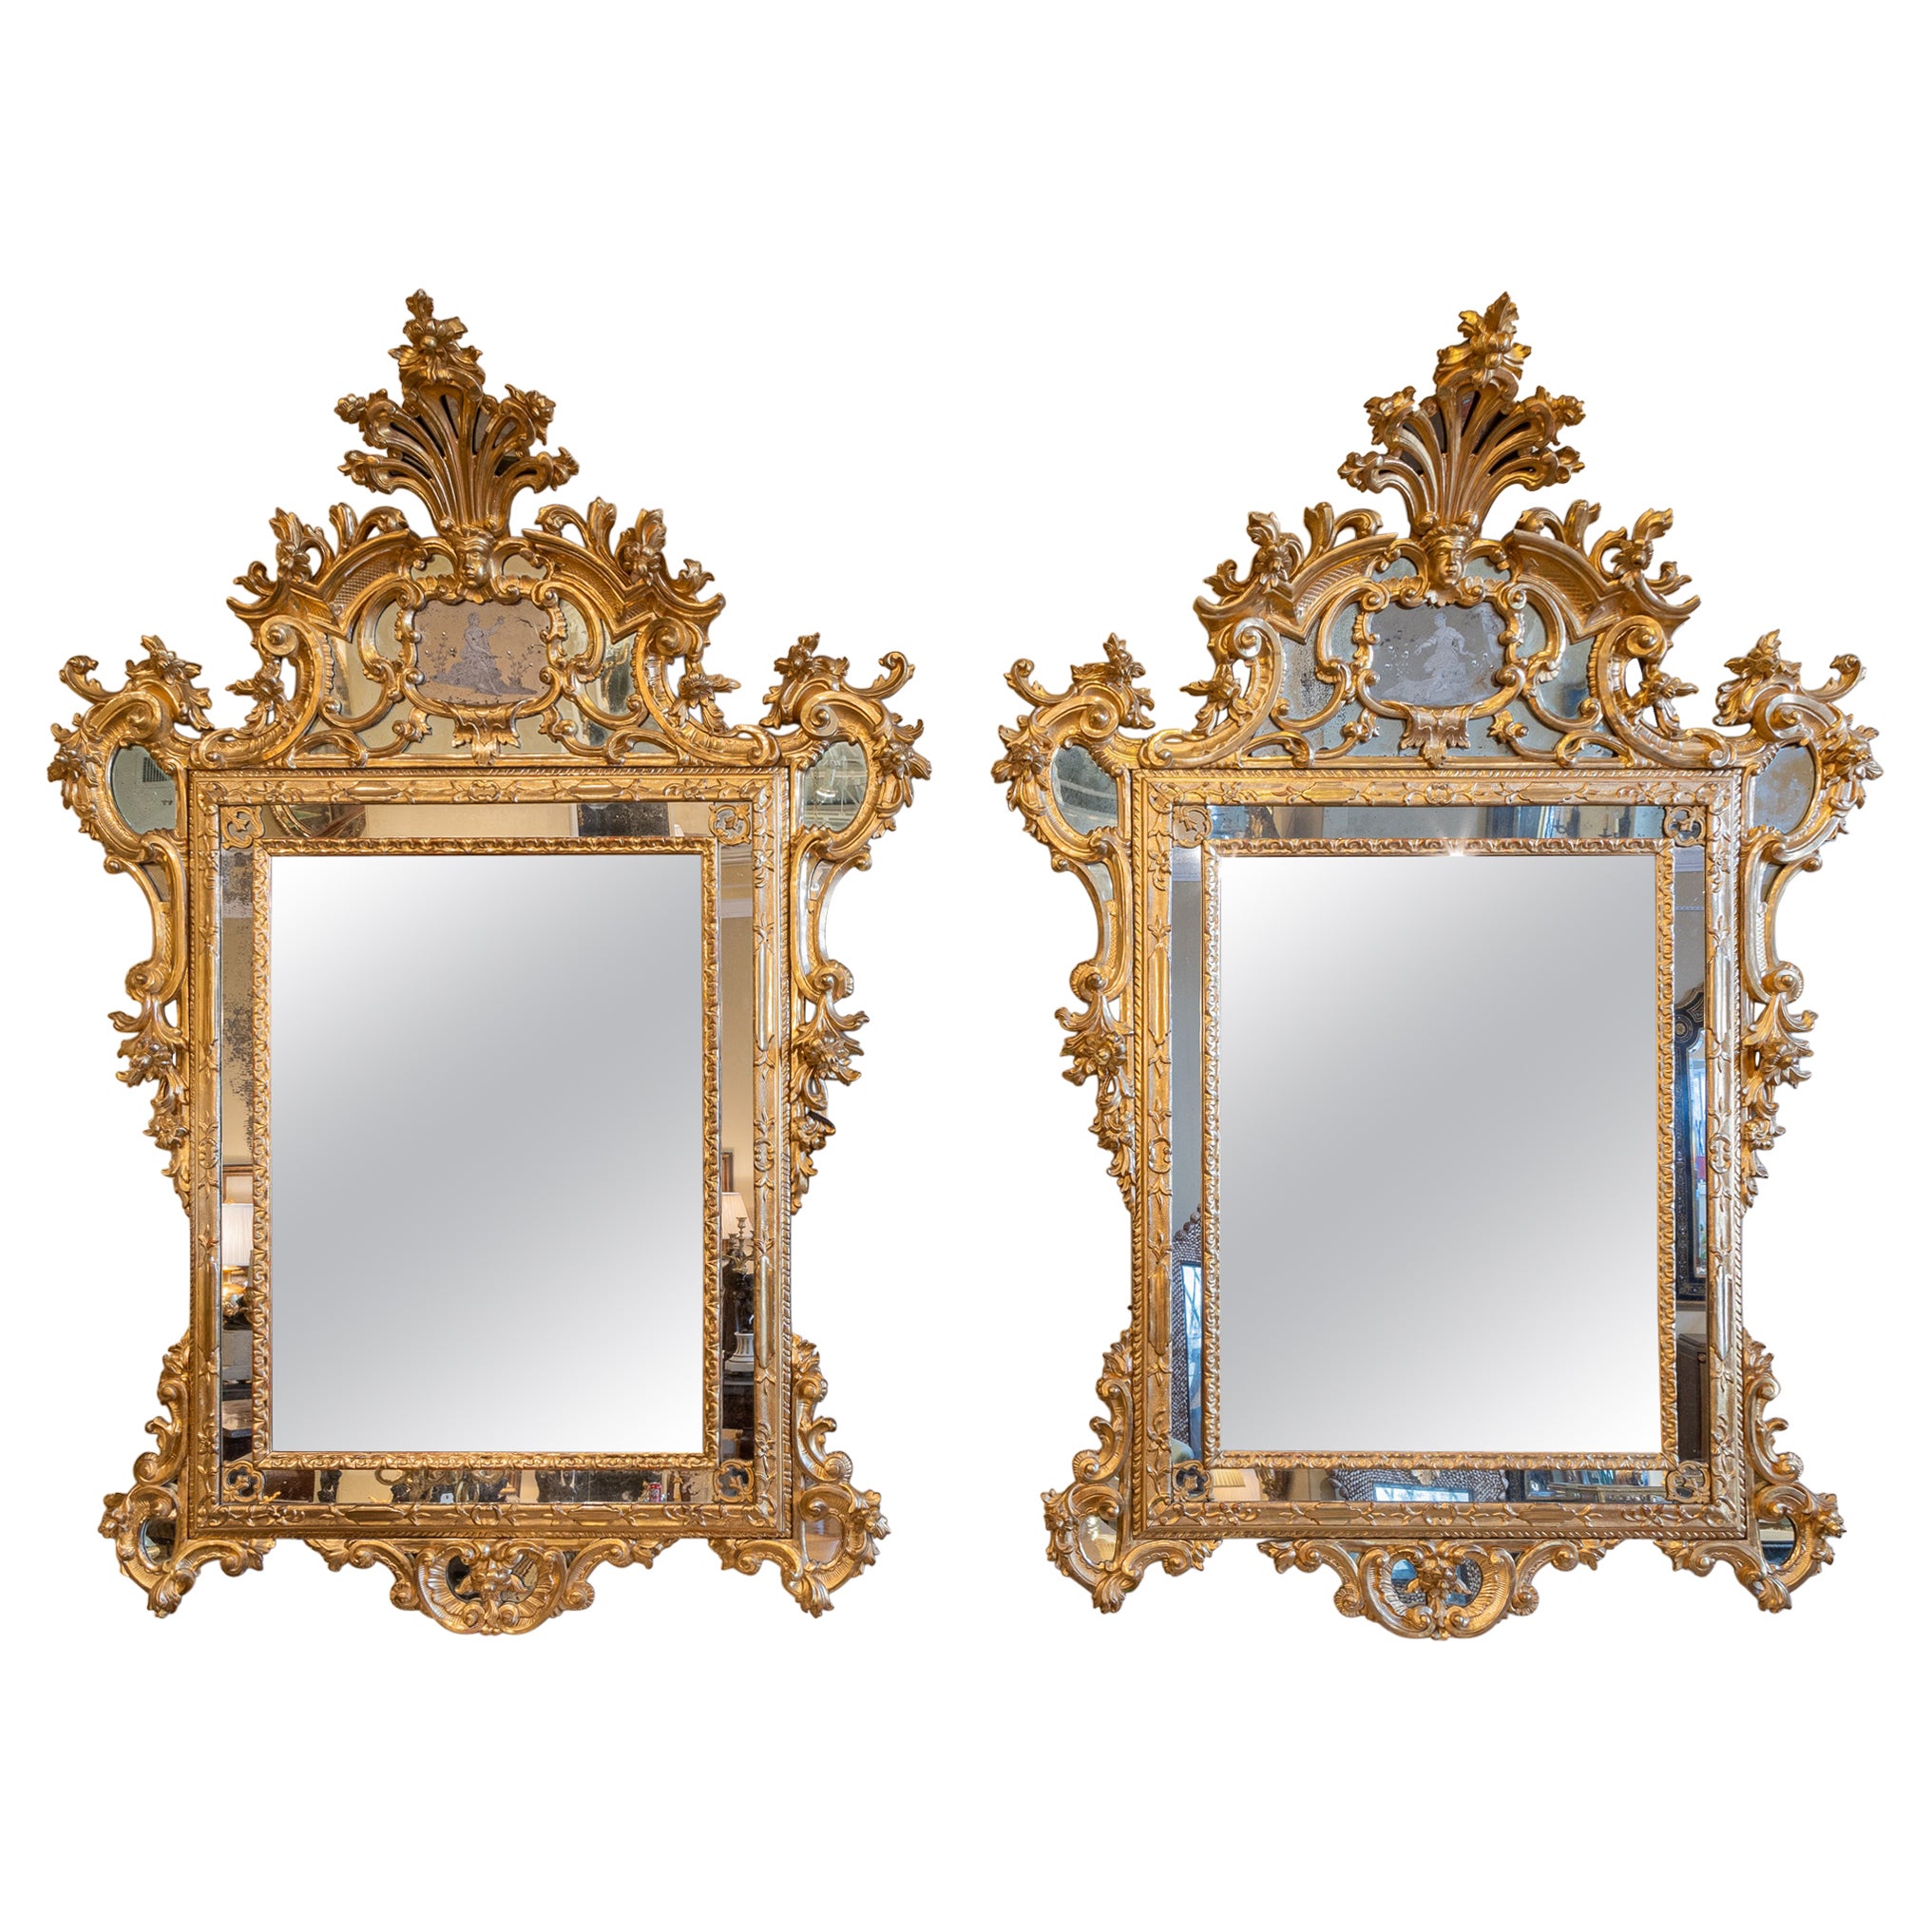 Very Fine Pair of 19th C French Water Gilt Carved and Etched Palatial Mirrors